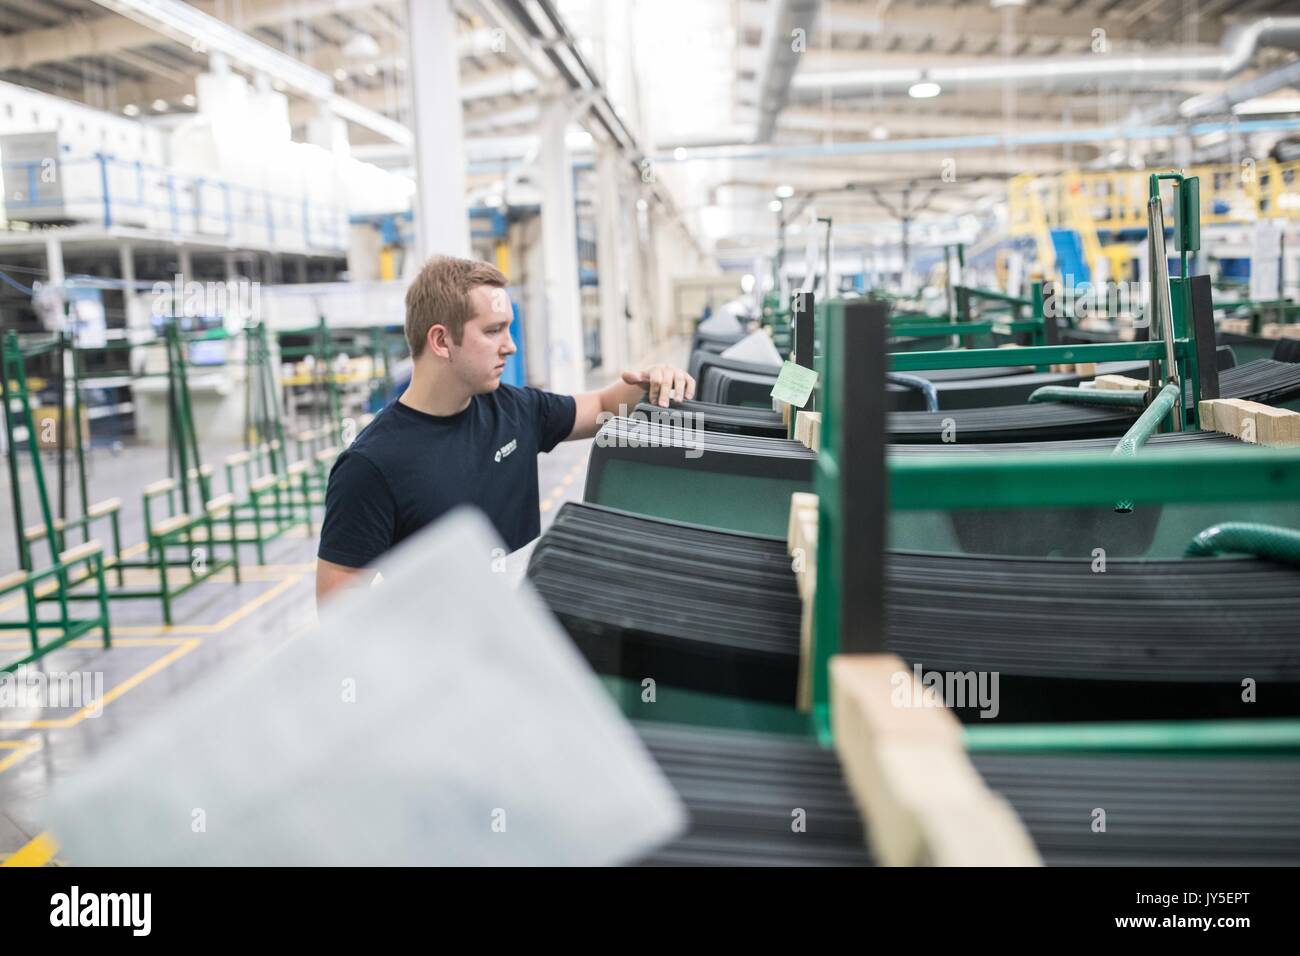 Kaluga, Russia. 18th July, 2017. A Russian worker works at an automobile-level float glass production line in the Russian factory of China's Fuyao Glass Industry Group Co. in Kaluga, Russia, July 18, 2017. Fuyao Group is a well-known Chinese enterprise that specializes in producing automobile safety glass and industrial technological glass. Fuyao invested in 2011 some 200 million U.S. dollars to build automobile-level float glass production lines in Kaluga. Credit: Wu Zhuang/Xinhua/Alamy Live News Stock Photo